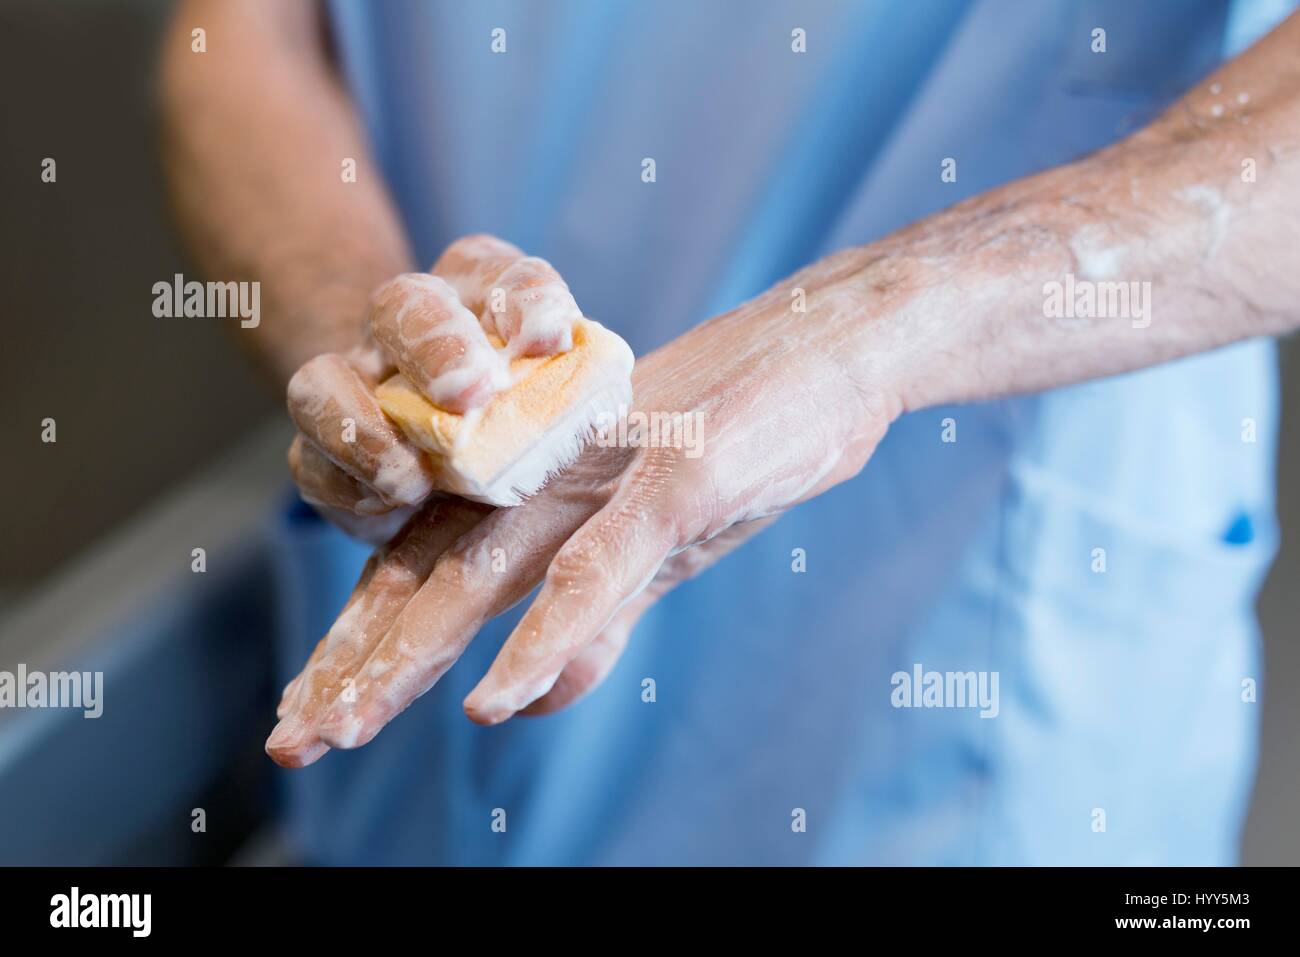 Doctor scrubbing hands with brush in hospital. Stock Photo